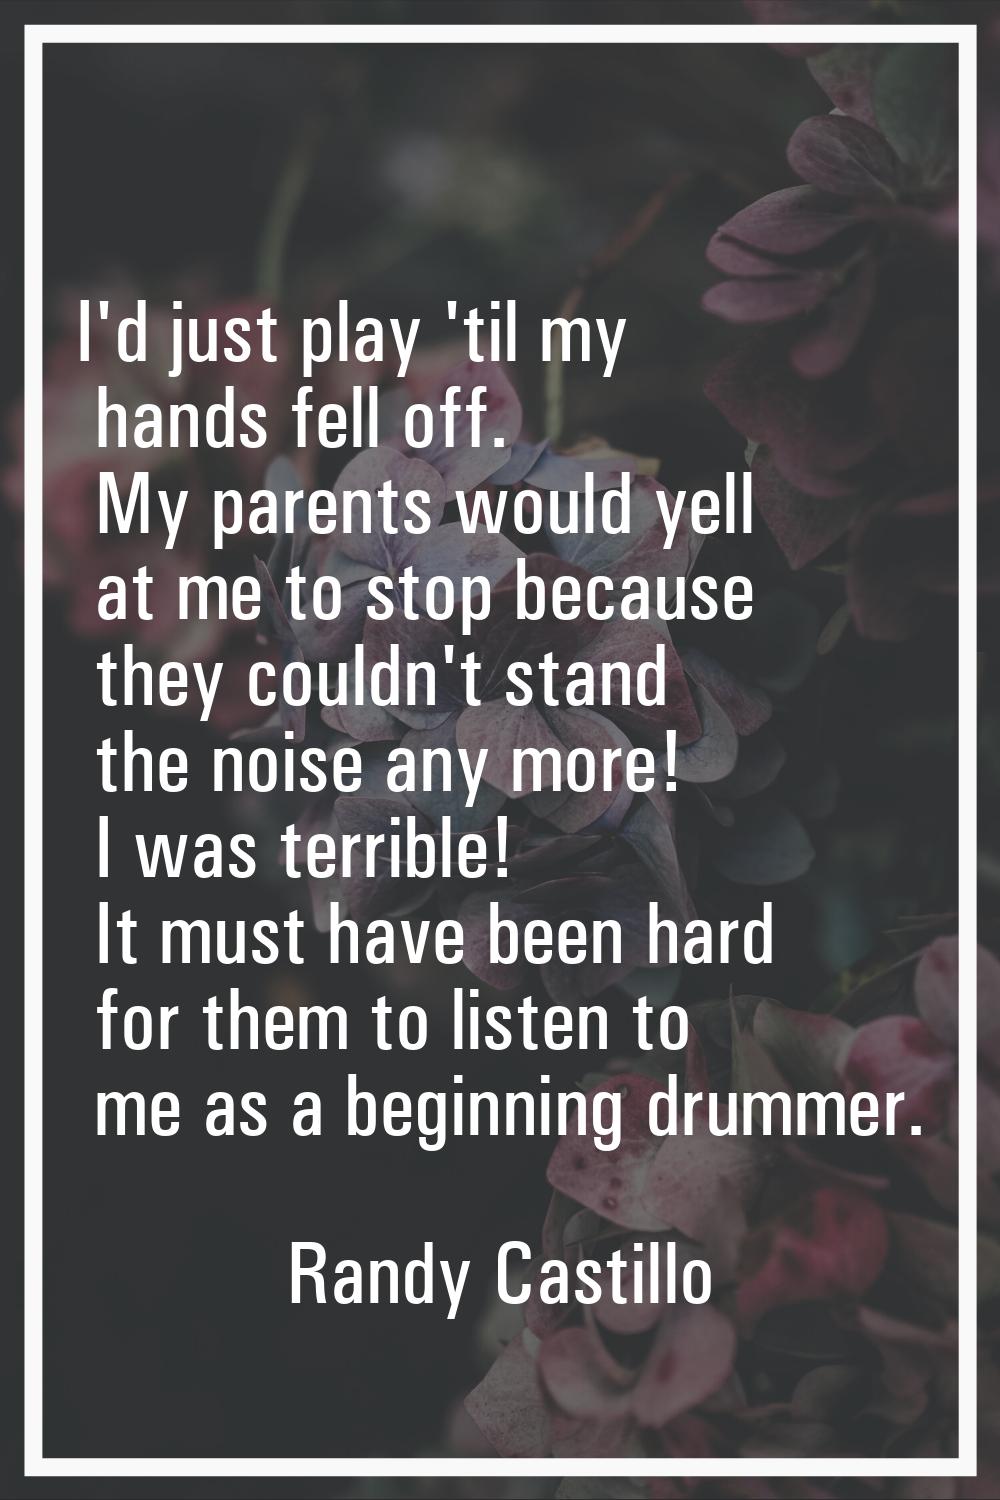 I'd just play 'til my hands fell off. My parents would yell at me to stop because they couldn't sta